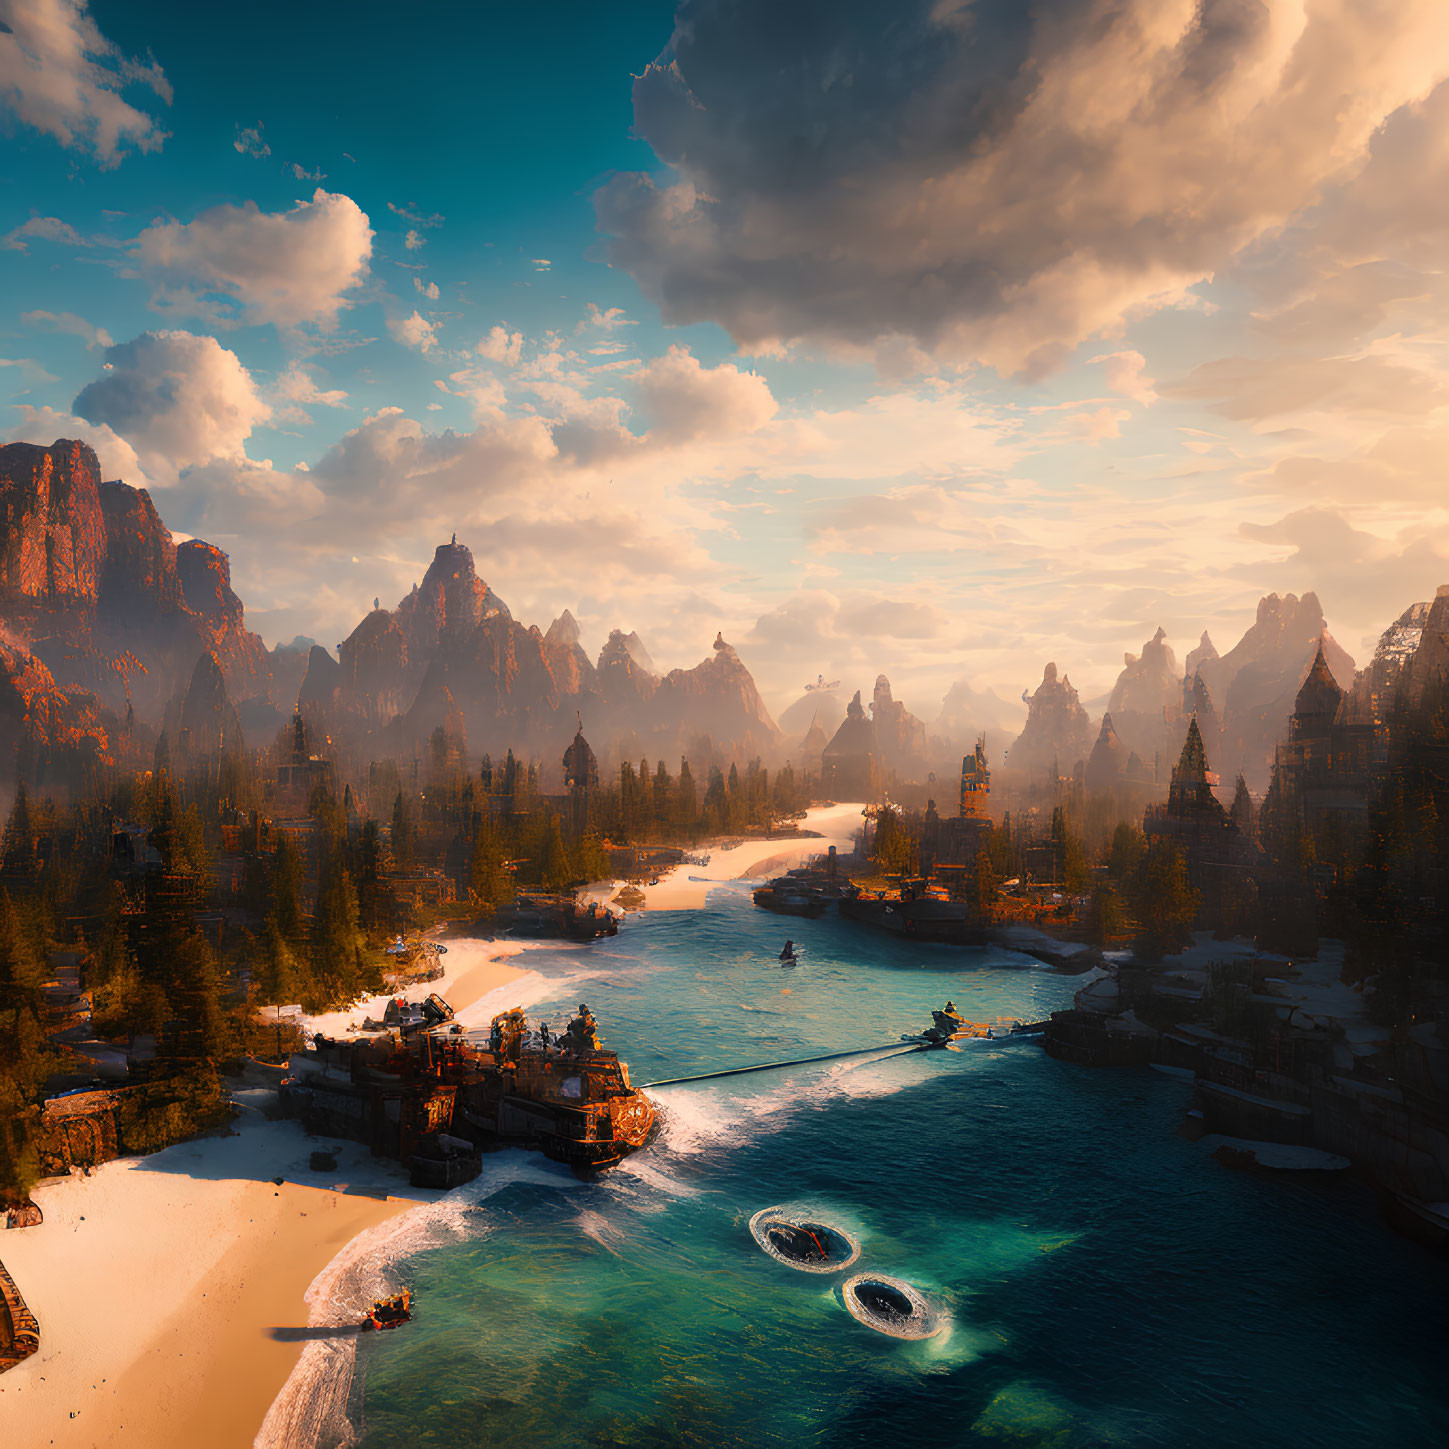 Majestic mountains, serene river, lush forests in fantasy sunset landscape